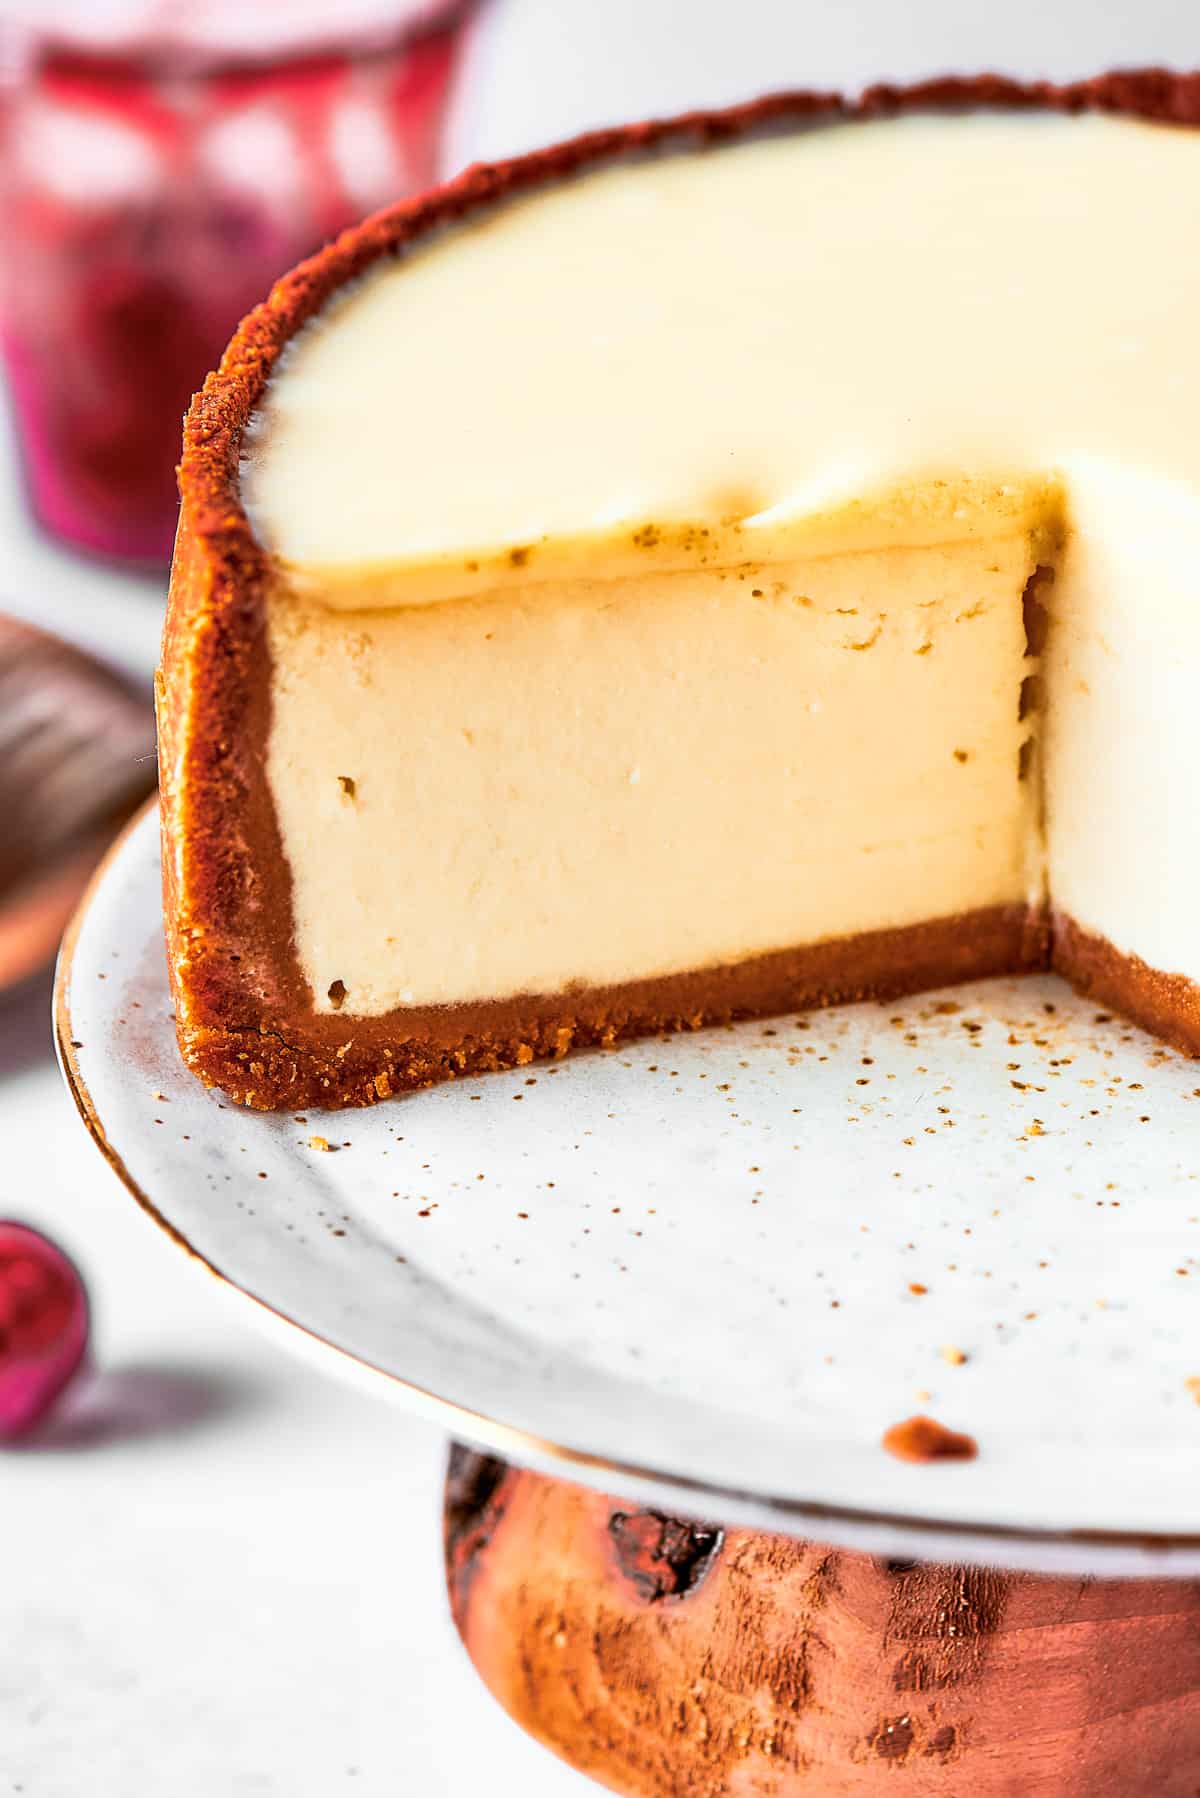 Close-up shot of the cut side of a cheesecake.